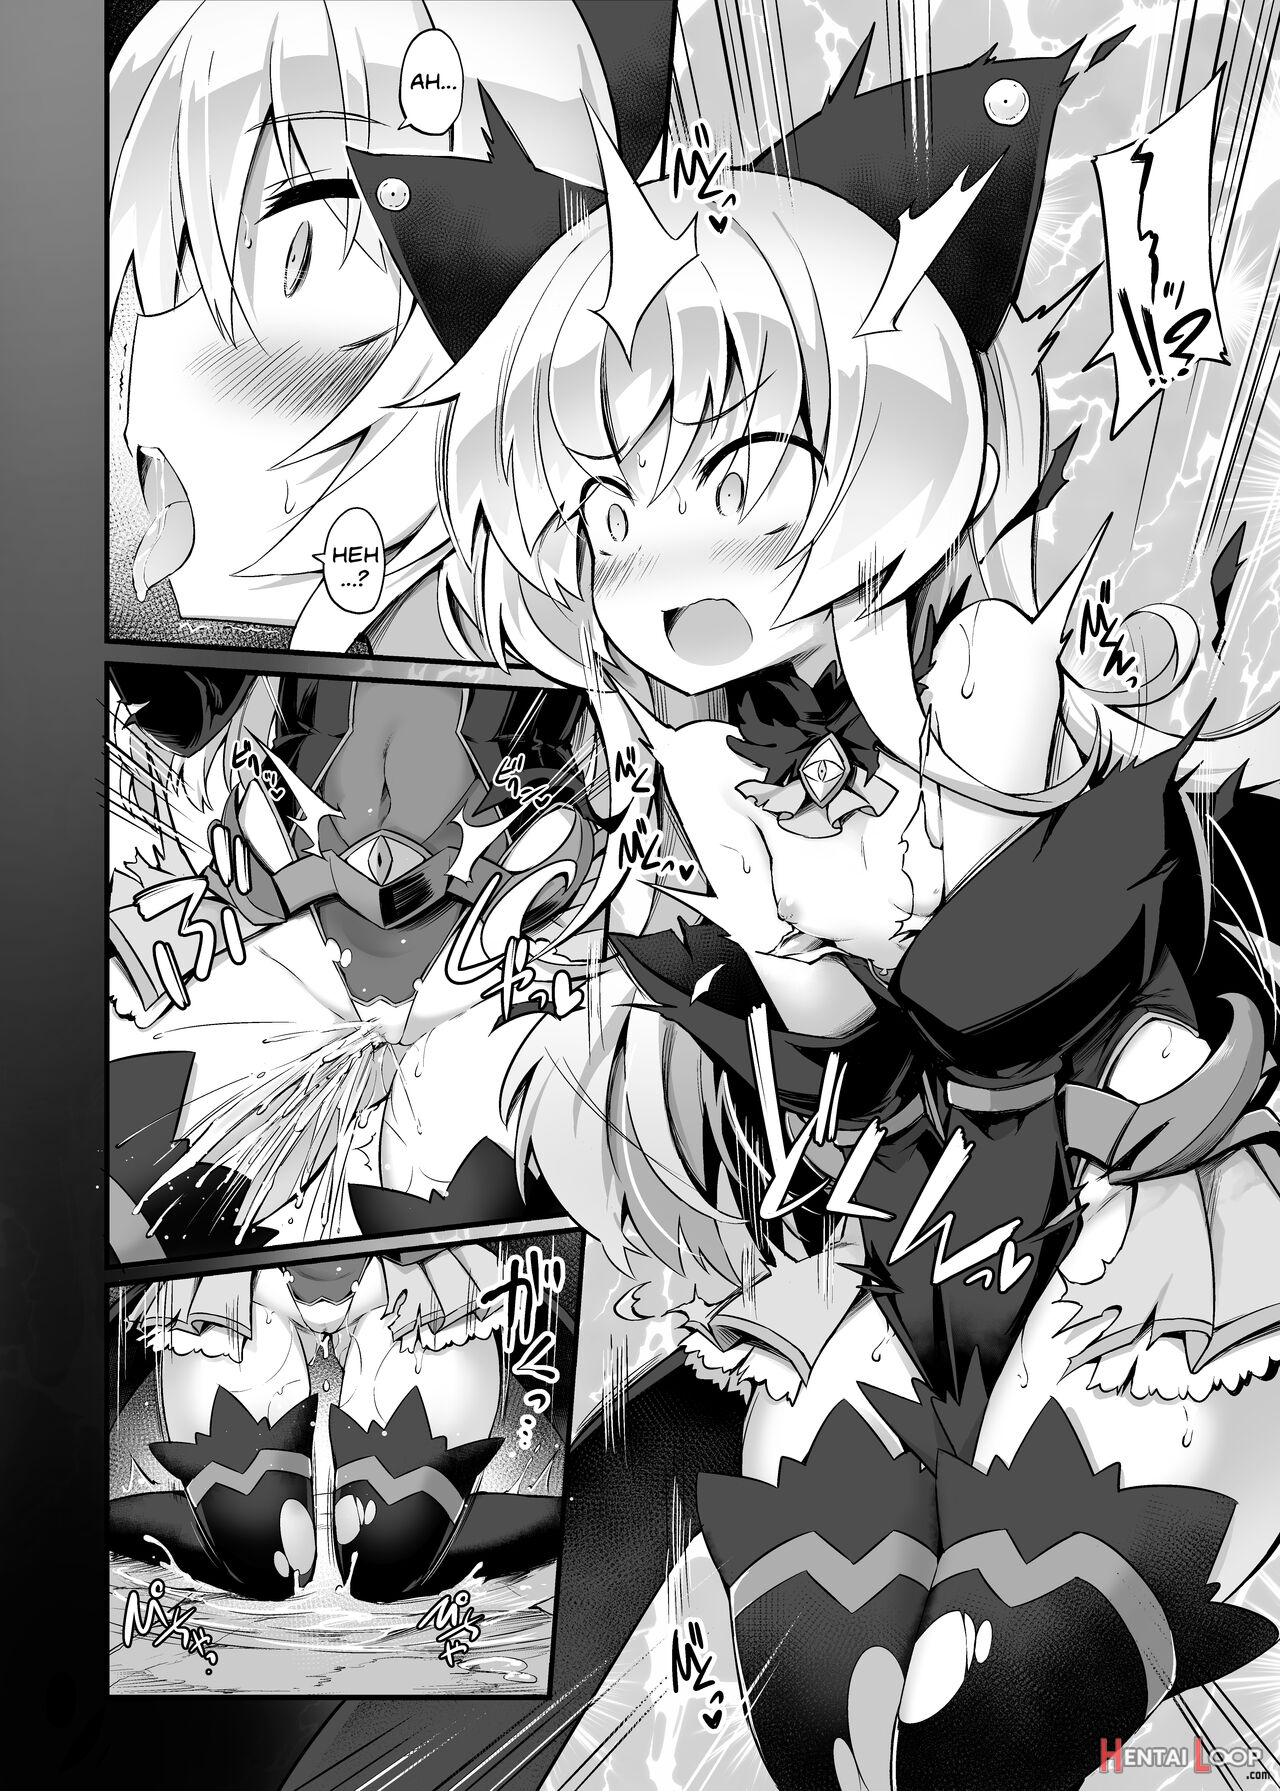 Masochist Cat X Magic Girl ~a Manga In Which The Evil Magical Girl Is Put On A Leash And Domesticated By The Good Magical Girl~ page 5